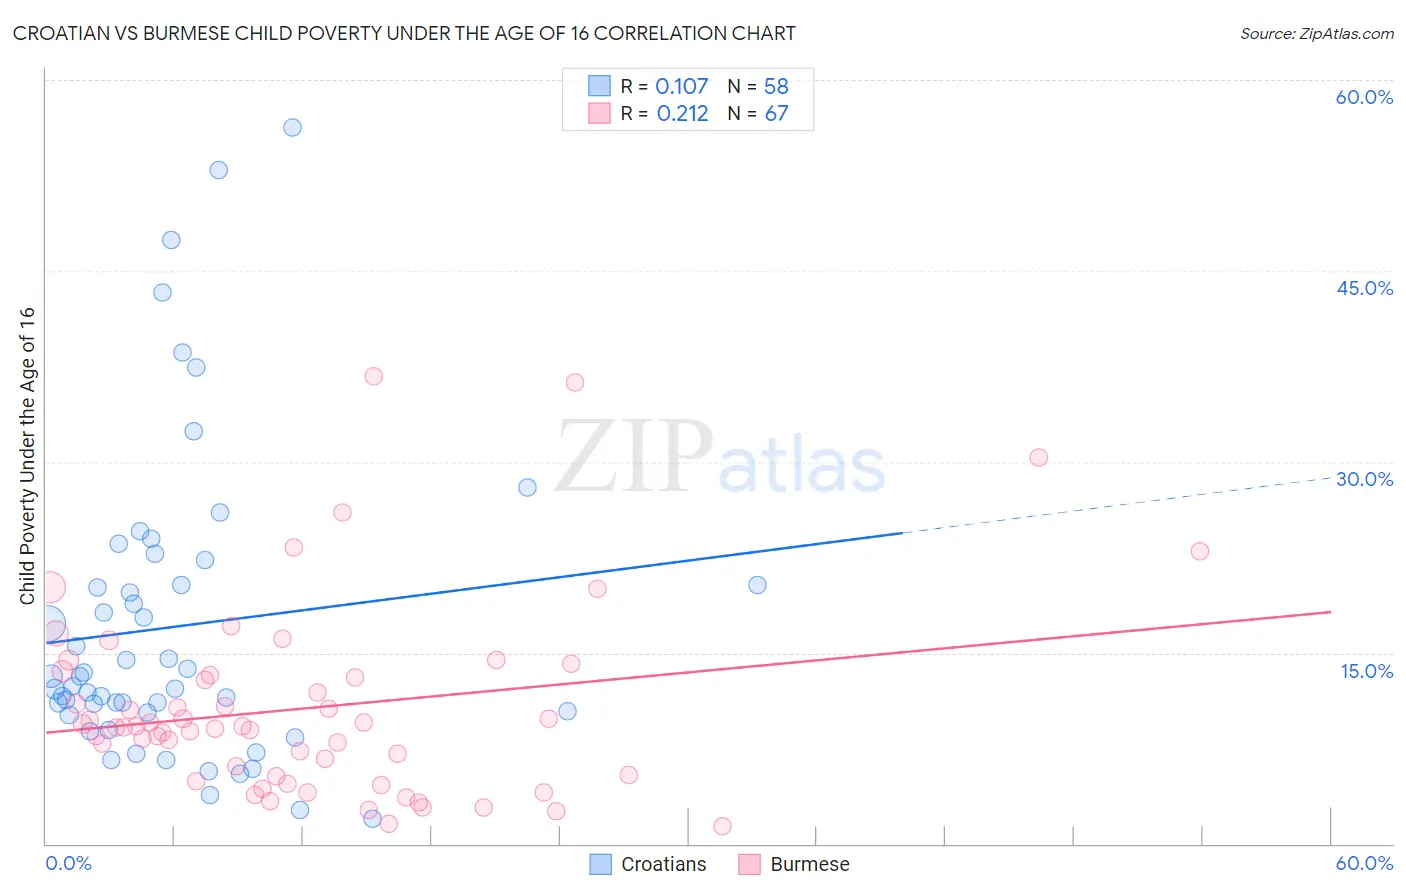 Croatian vs Burmese Child Poverty Under the Age of 16